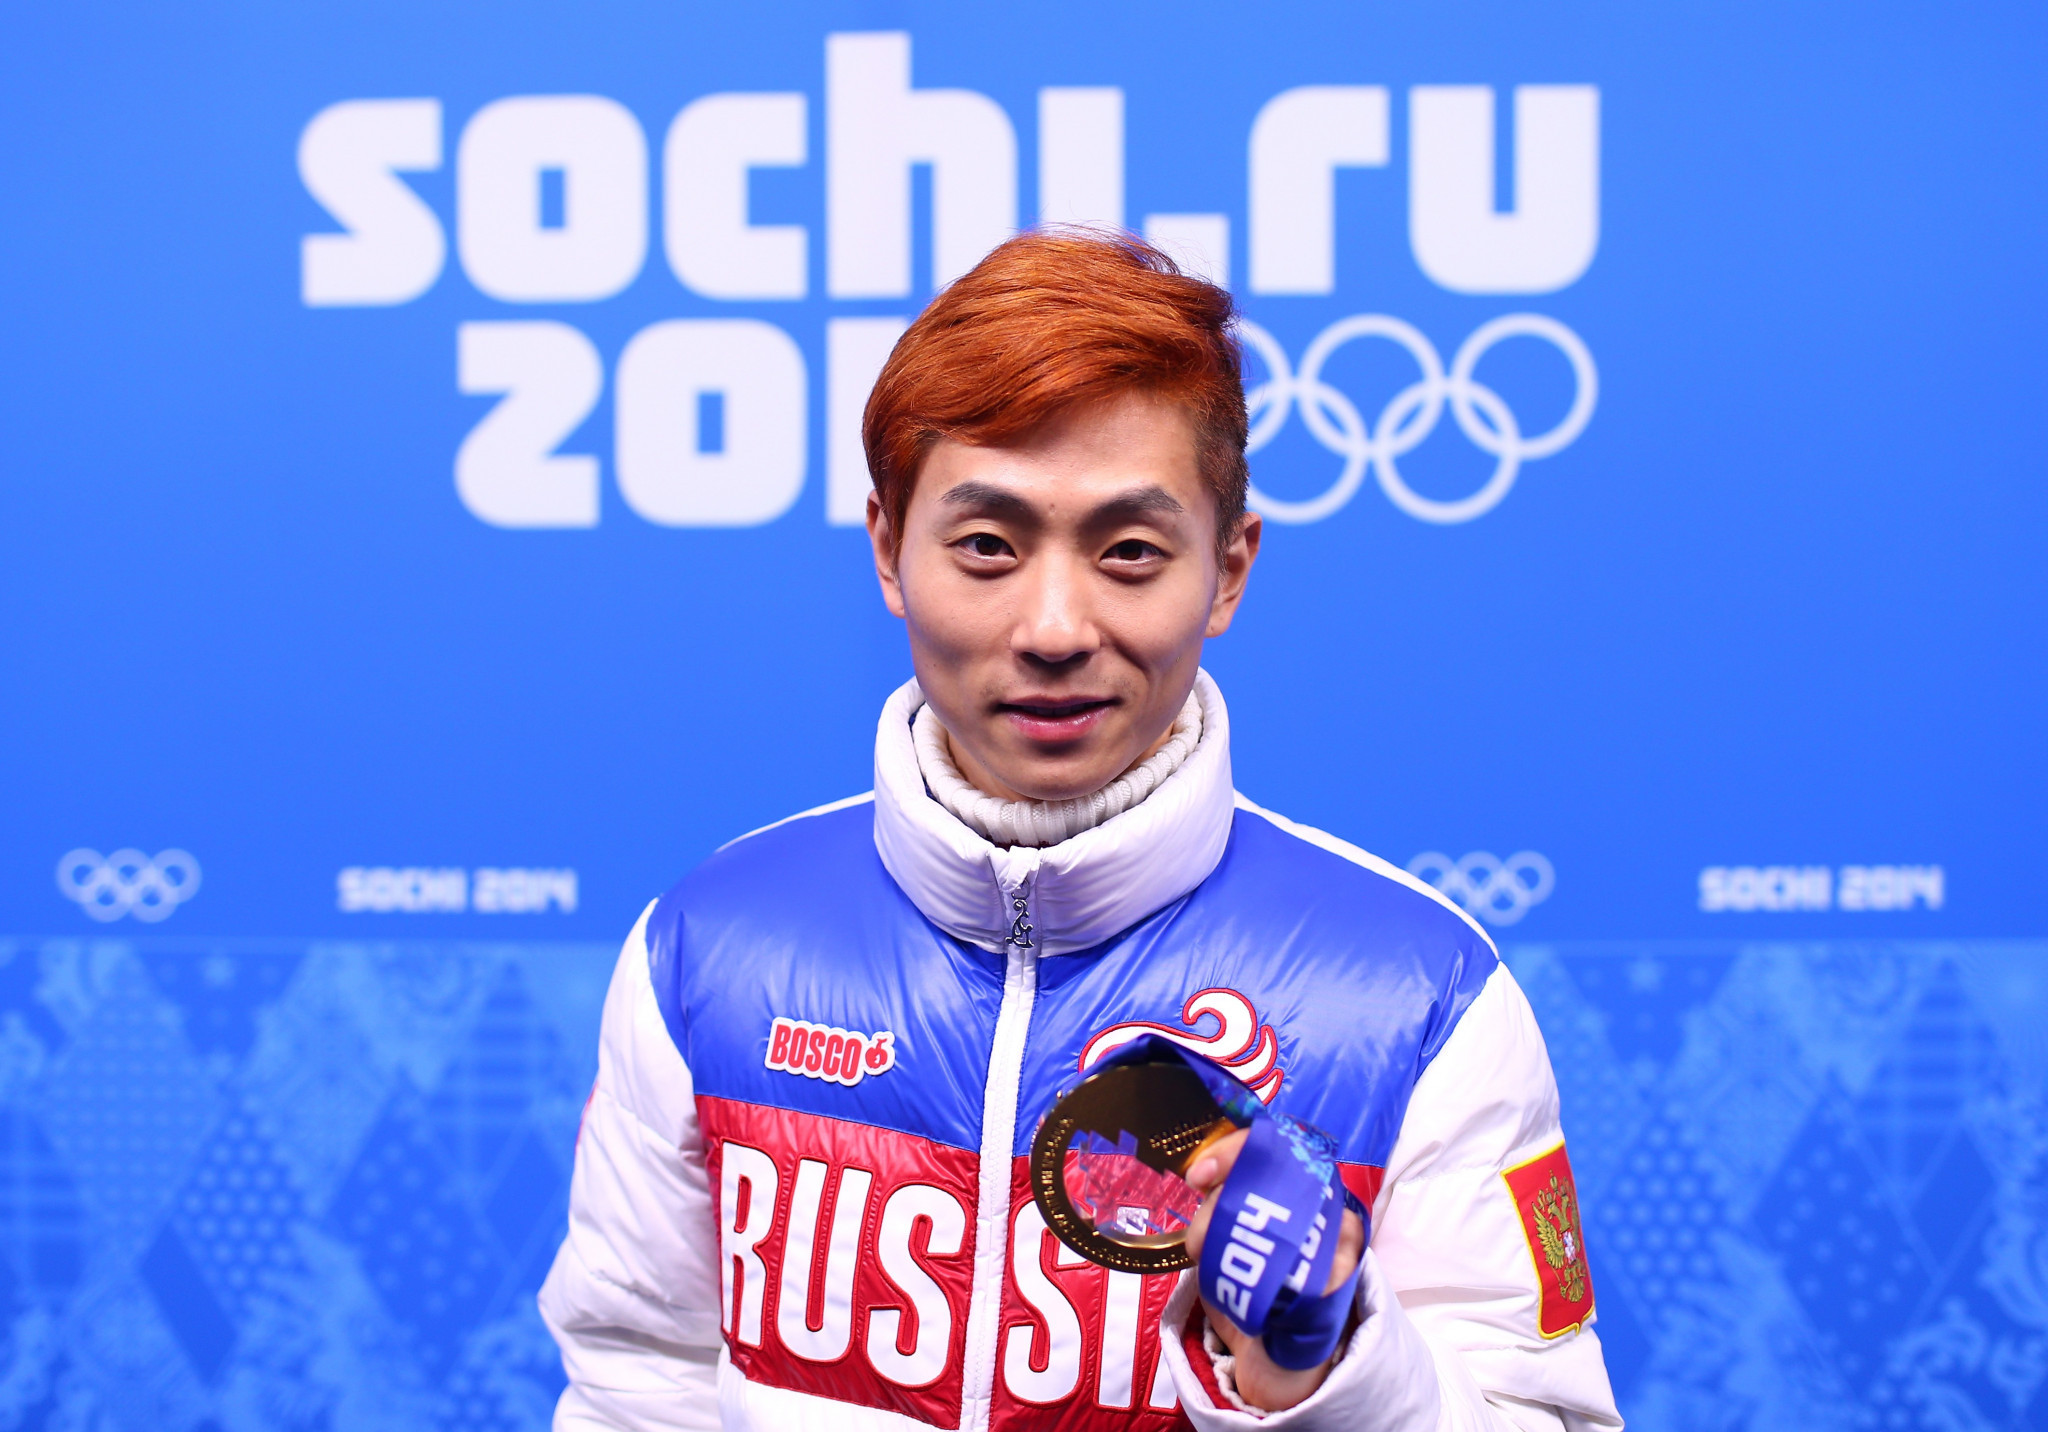 An won three gold medals at the Sochi 2014 Winter Olympics for Russia ©Getty Images